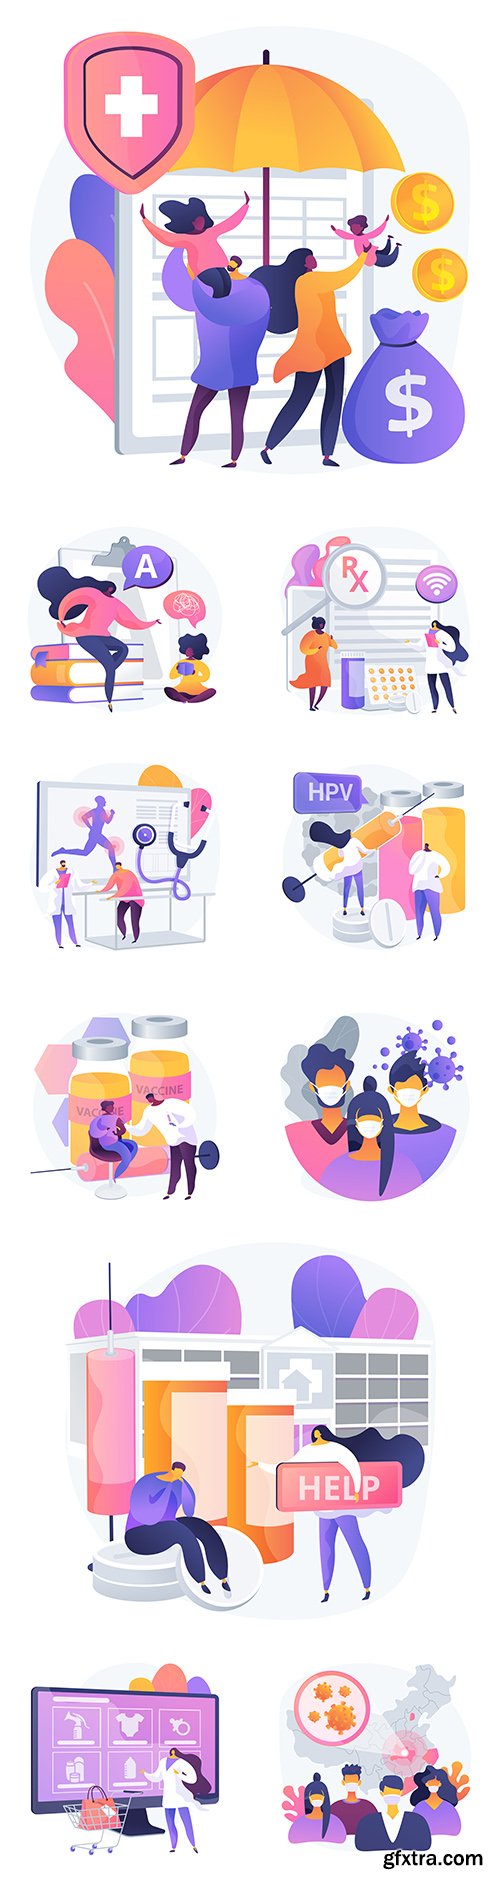 People and medicine flat and gradient design illustrations
